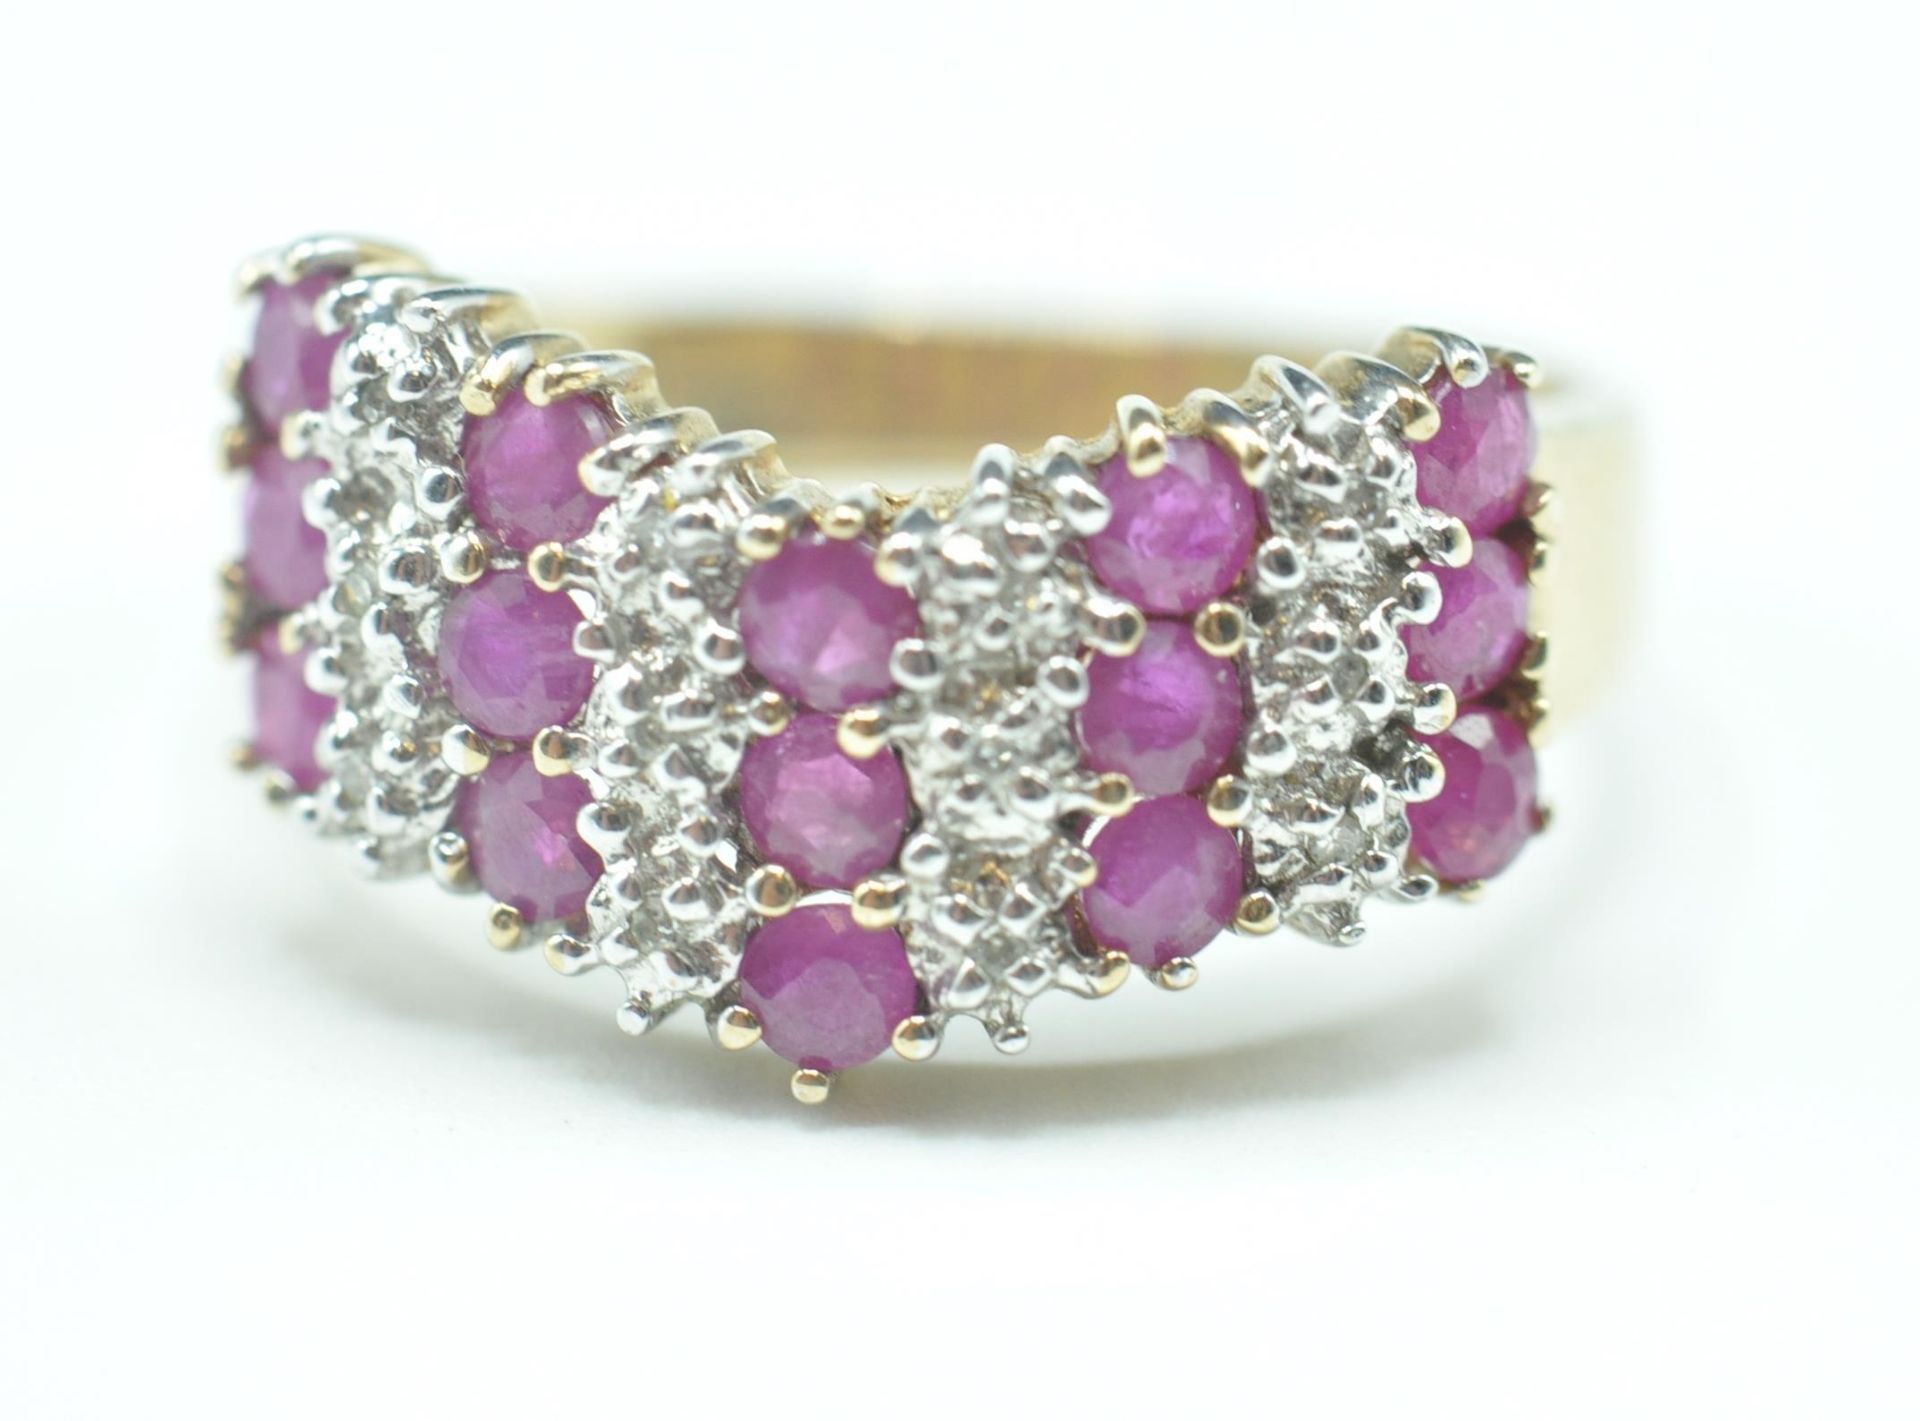 9CT GOLD PINK AND WHITE STONE RING - Image 2 of 6